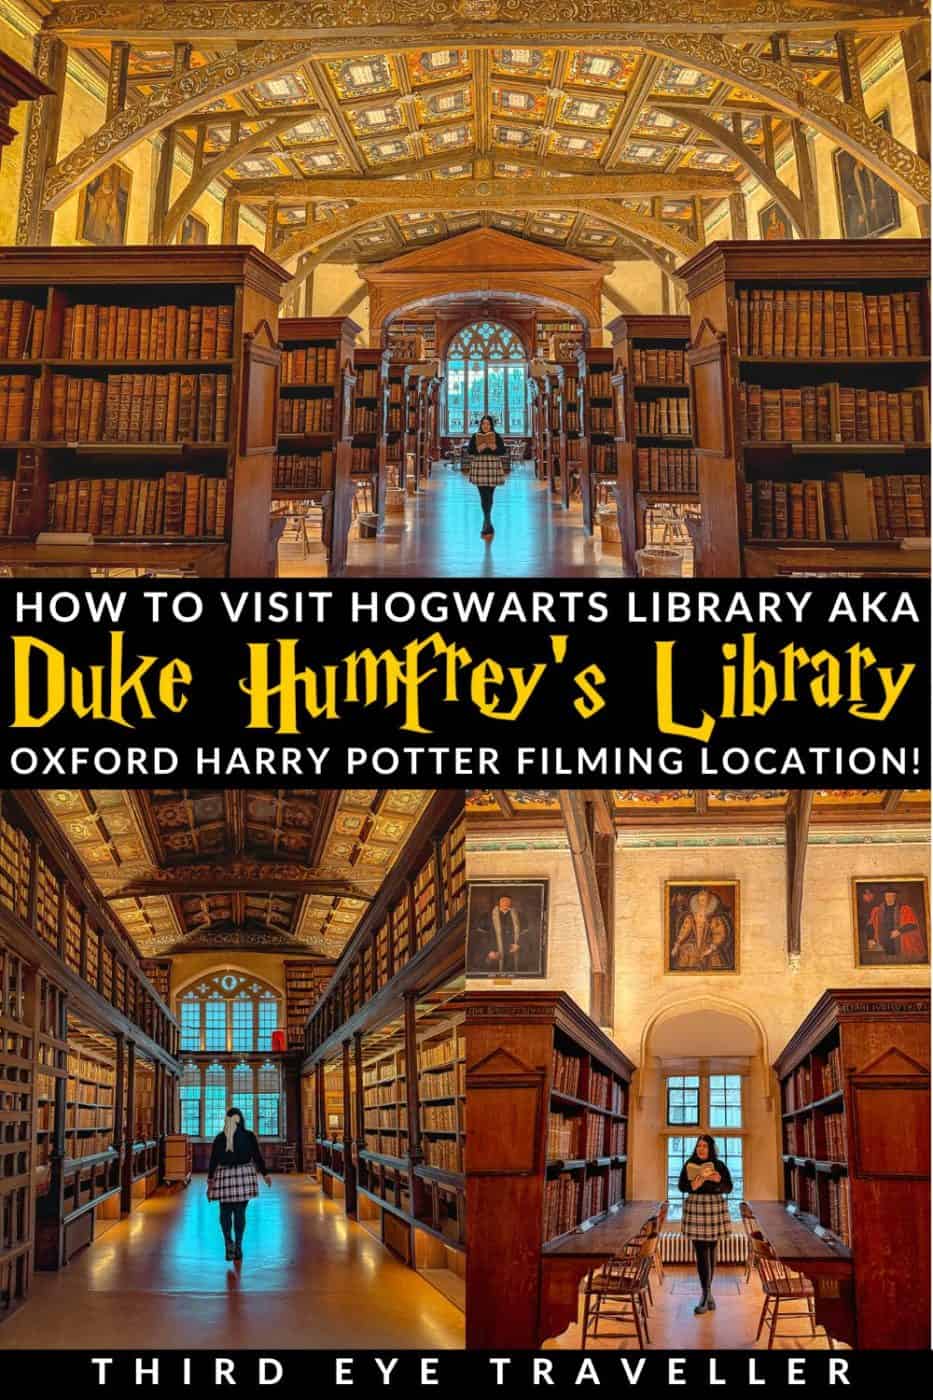 How to visit Duke Humfrey's Library Oxford